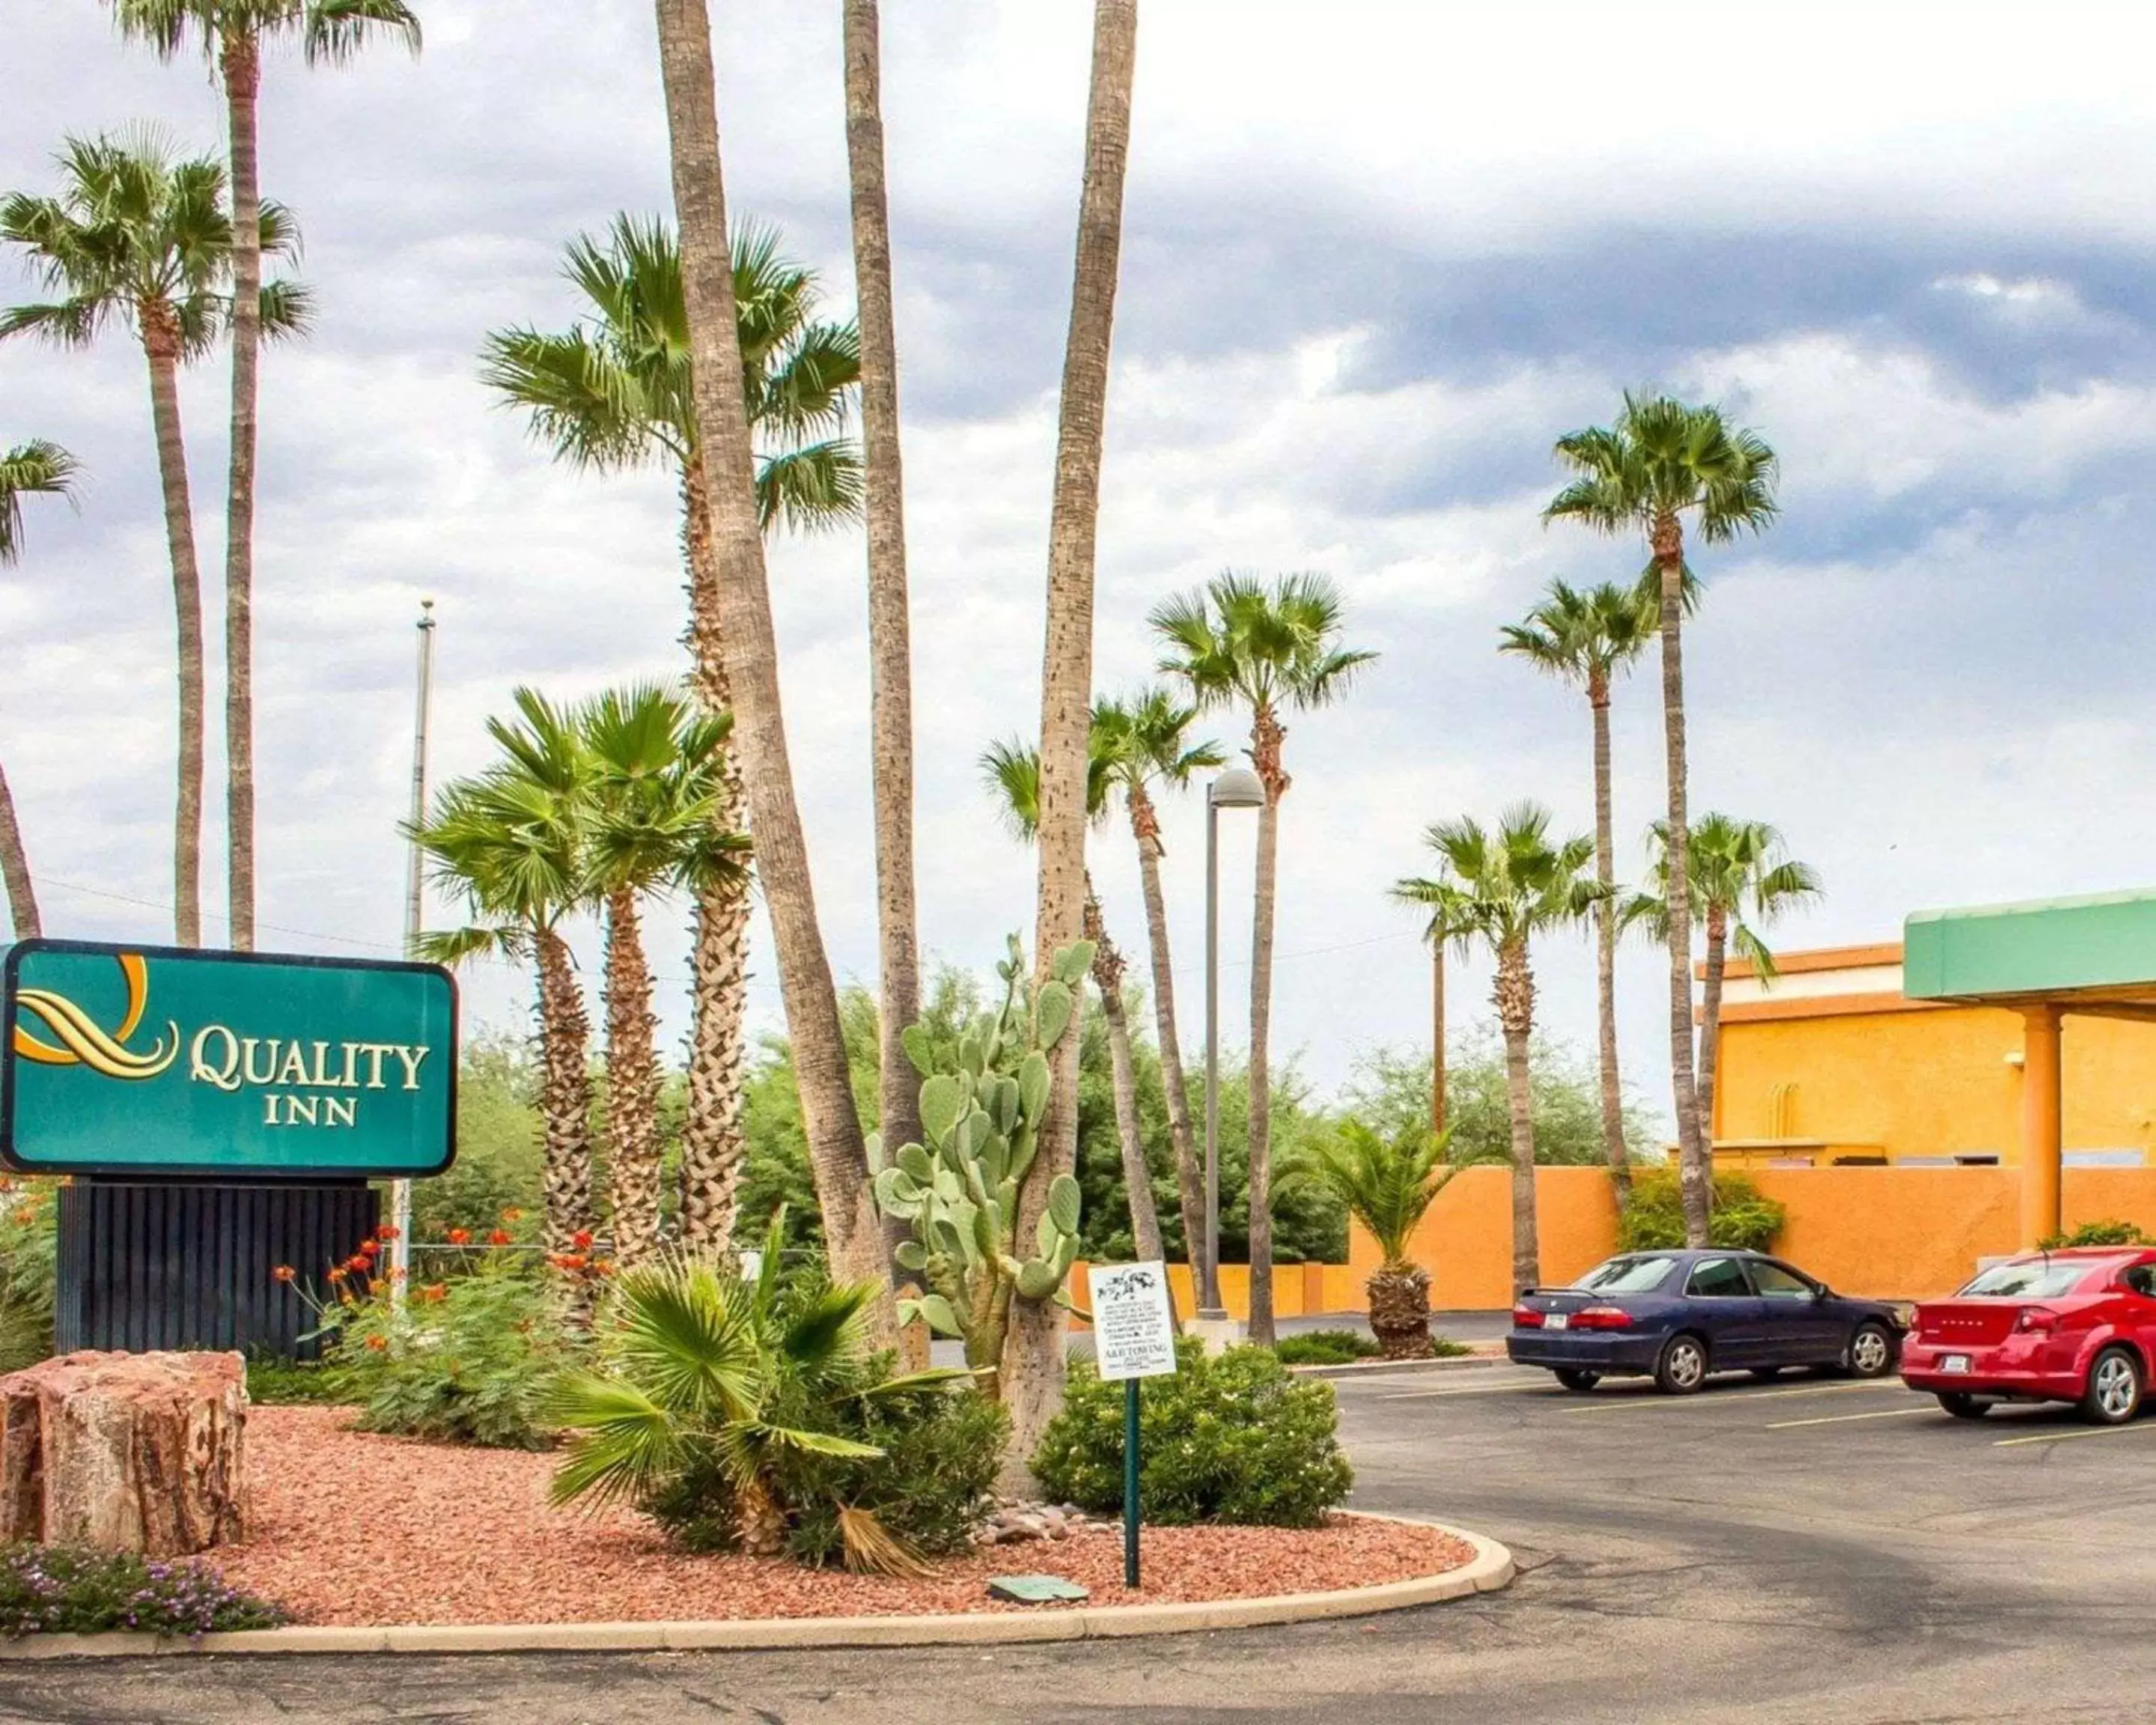 Property building in Quality Inn - Tucson Airport